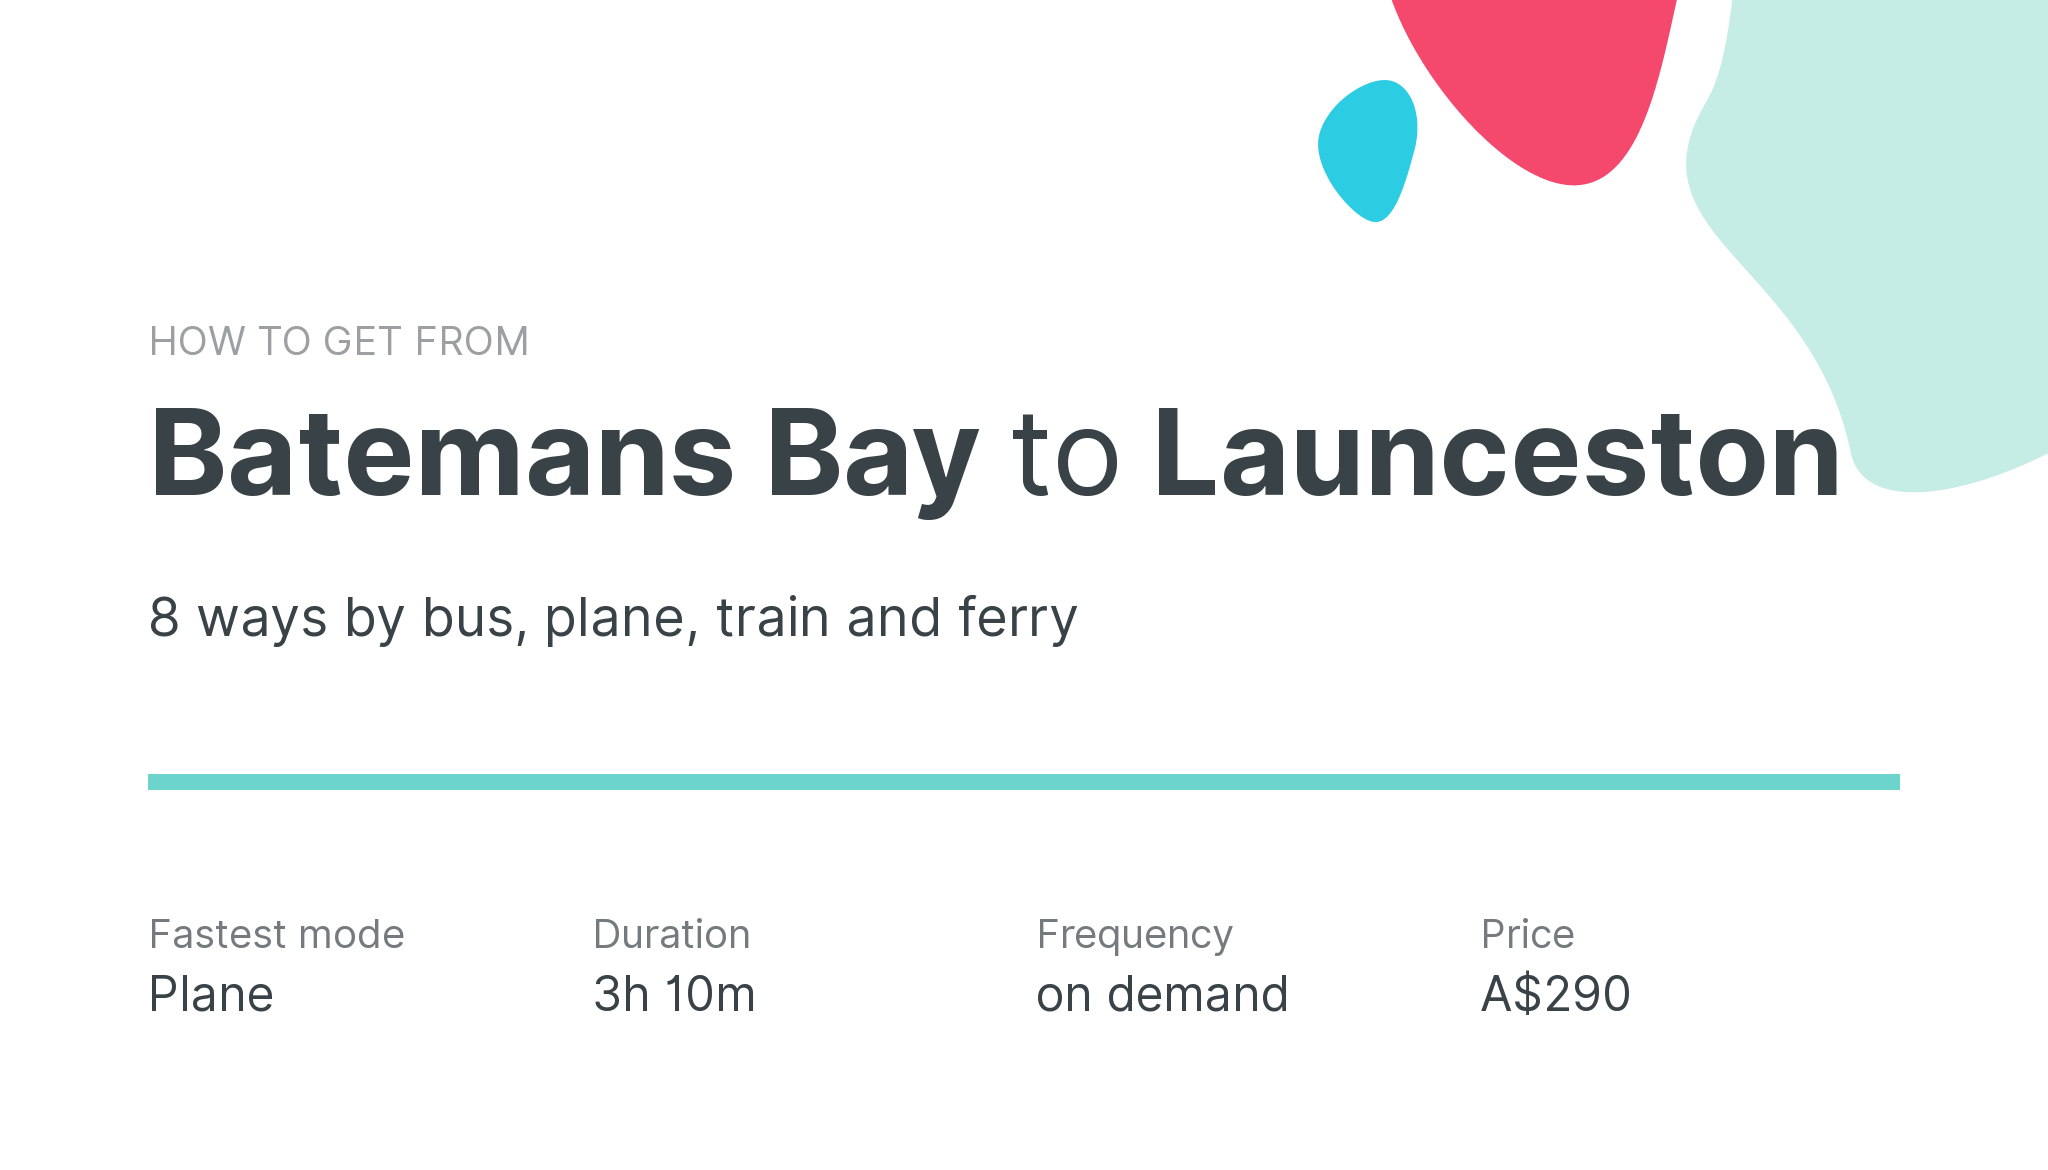 How do I get from Batemans Bay to Launceston